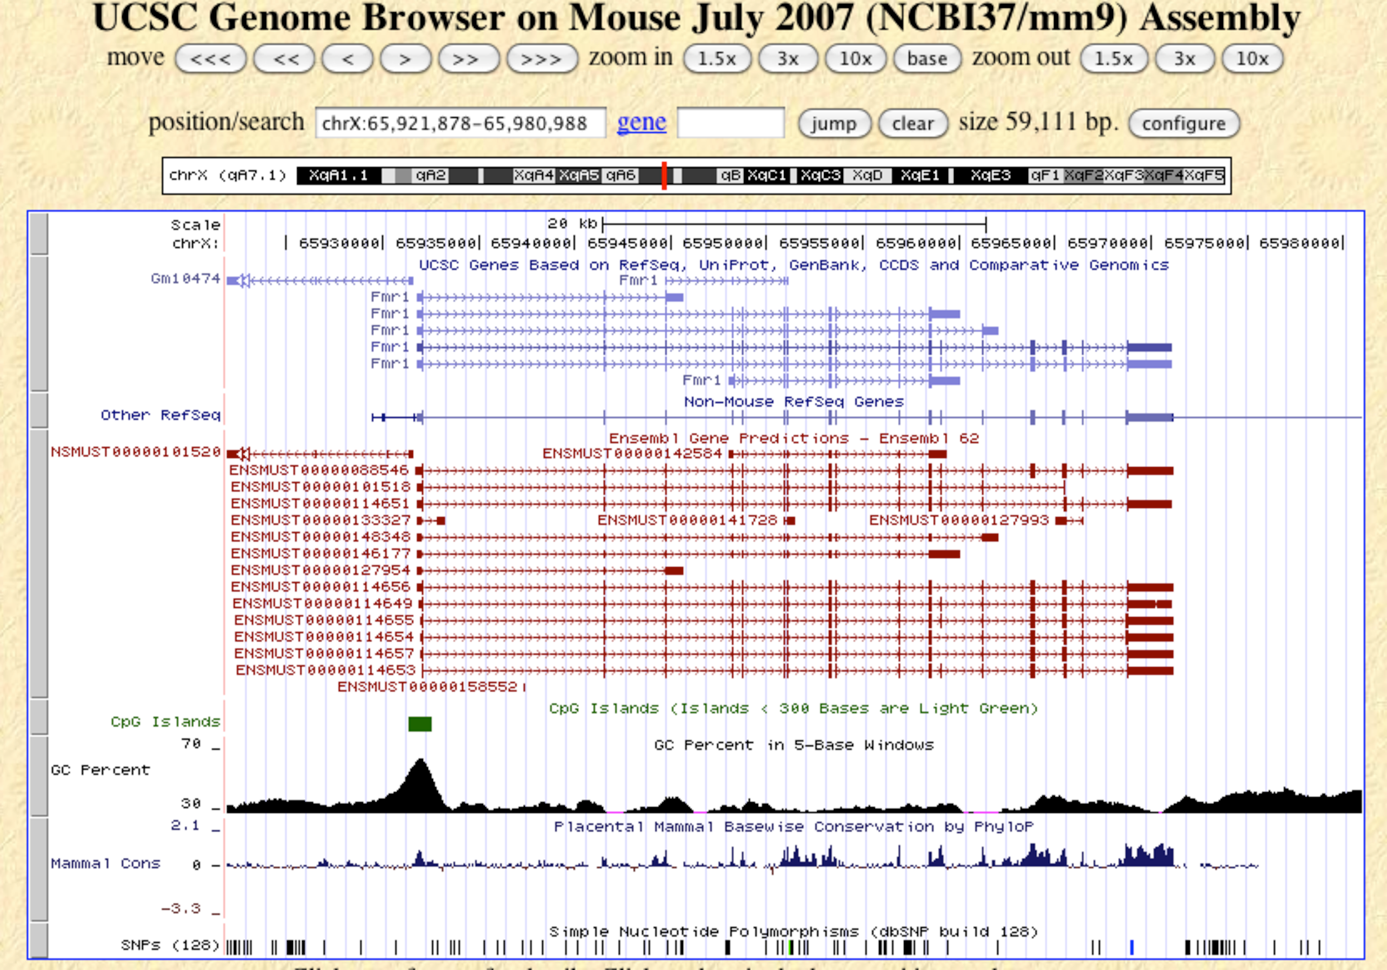 A screen shot of a UCSC genome browser view around the FMR1 locus on the mouse chromosome.